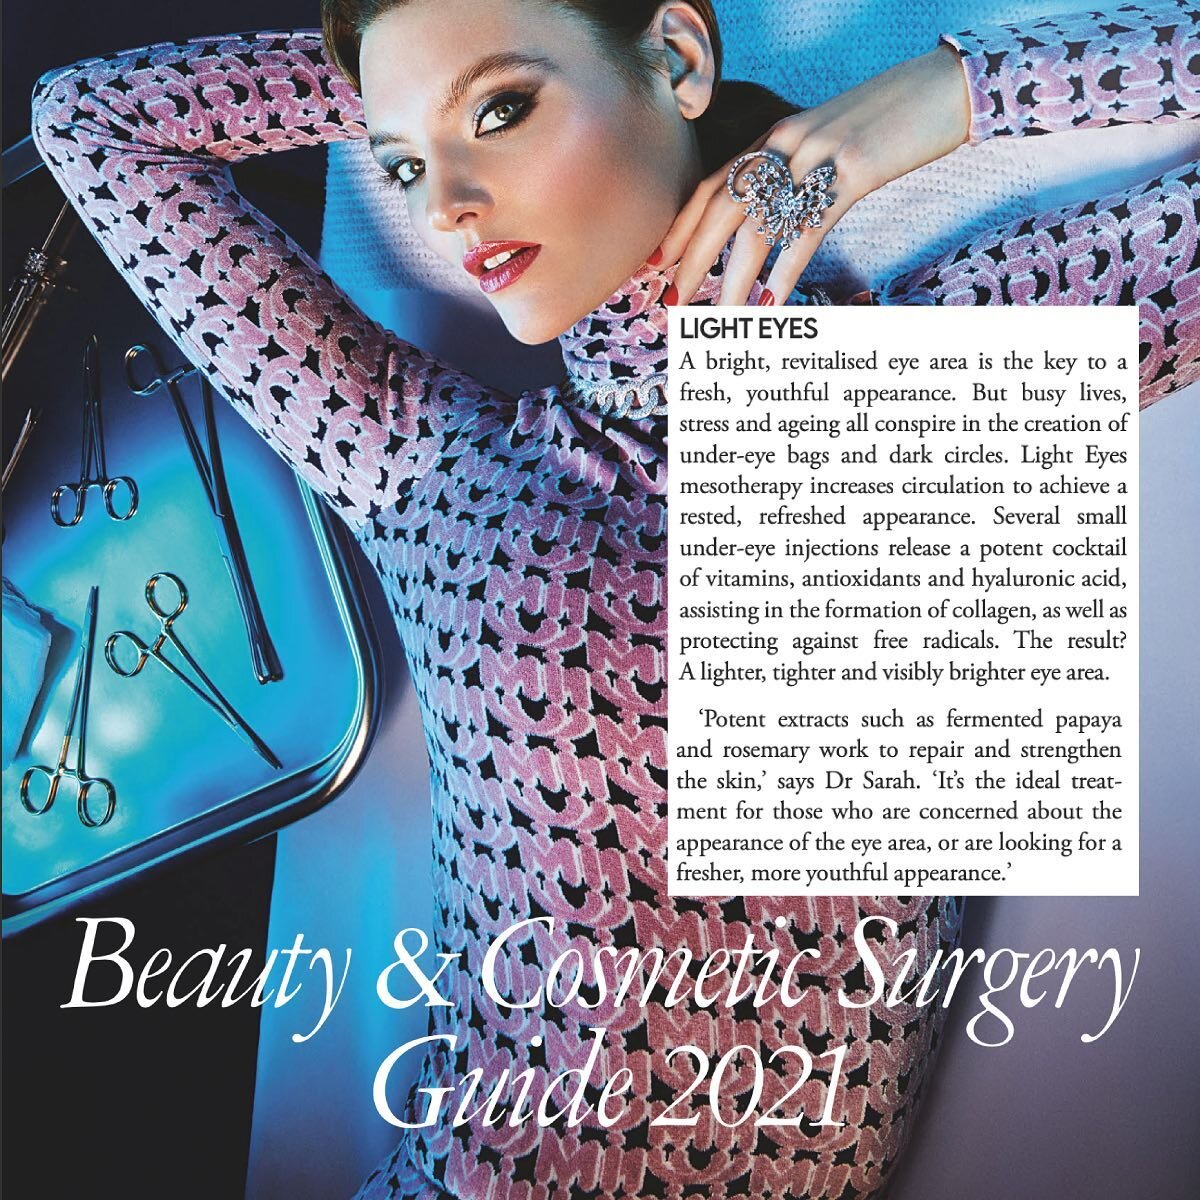 LightEyes is listed in Tatler&rsquo;s Beauty &amp; Cosmetic Surgery guide 2021 as three of the top treatments in The Lovely Clinic! We are proud to say that Dr Sarah Tonks, Dr Kishan Raichura, Dr Semira Kwabi and Dr Euan Mackinnon in The Lovely Clini